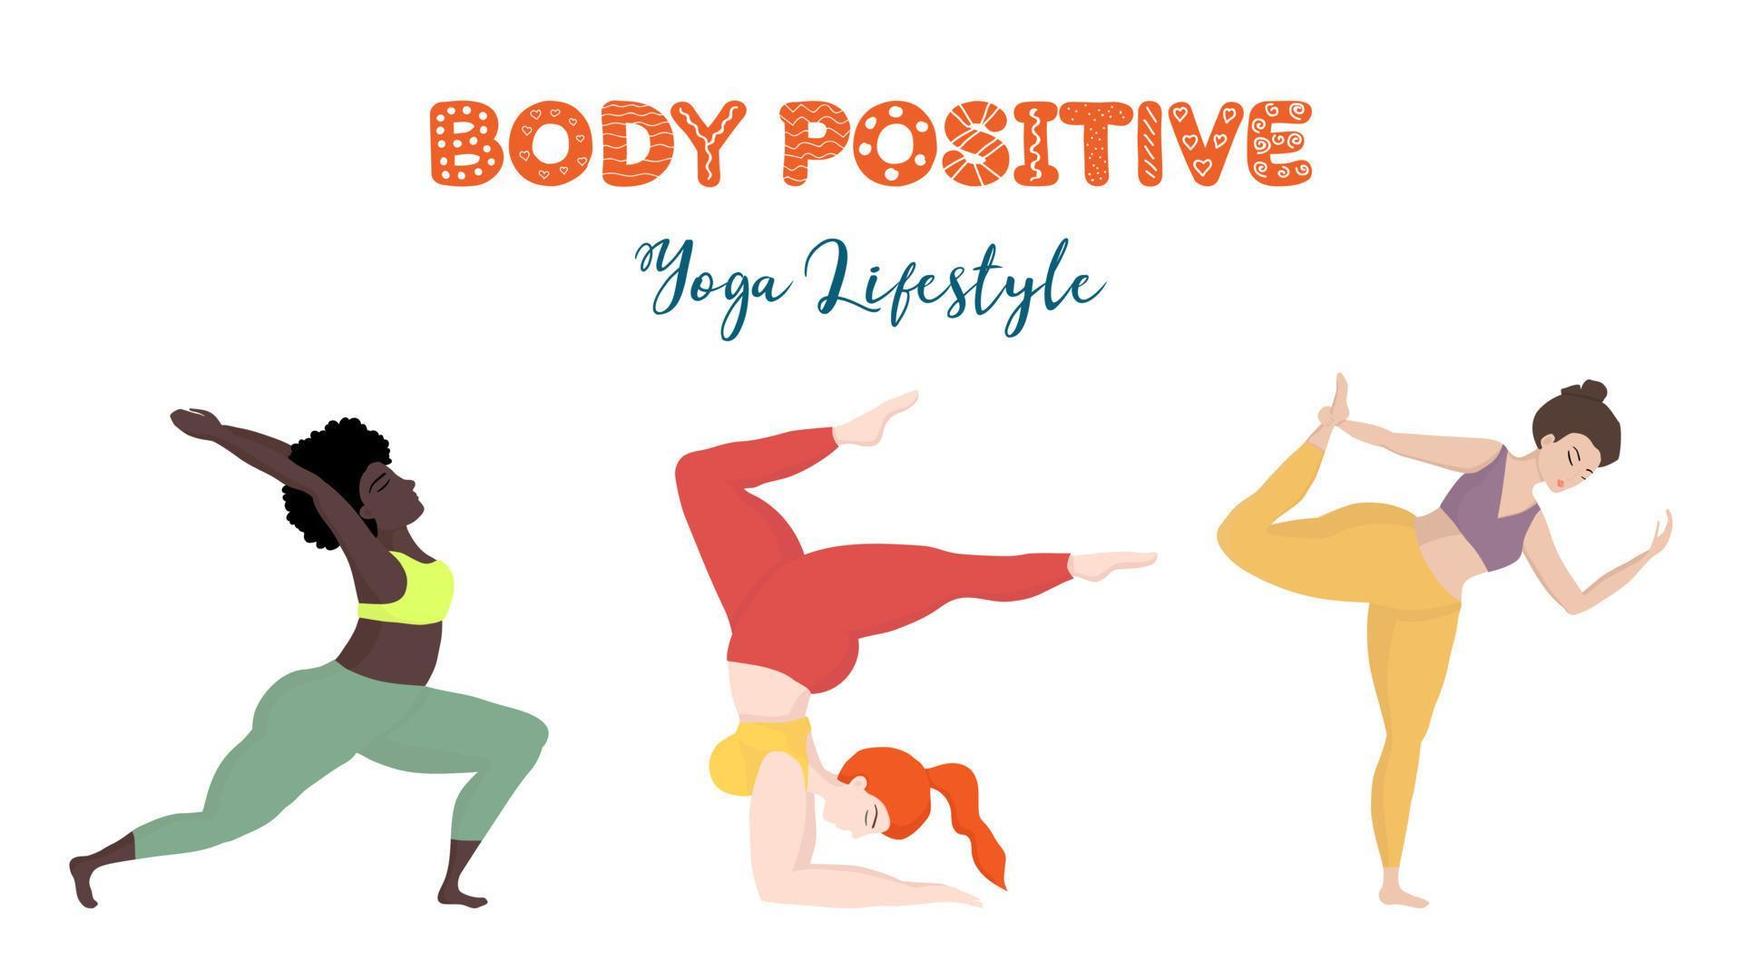 Vector banner or screen template for school website or yoga studio with 3 plus size women in yoga positions. Sports and health body positive concept. Bright banner with yoga practicing lifestyle